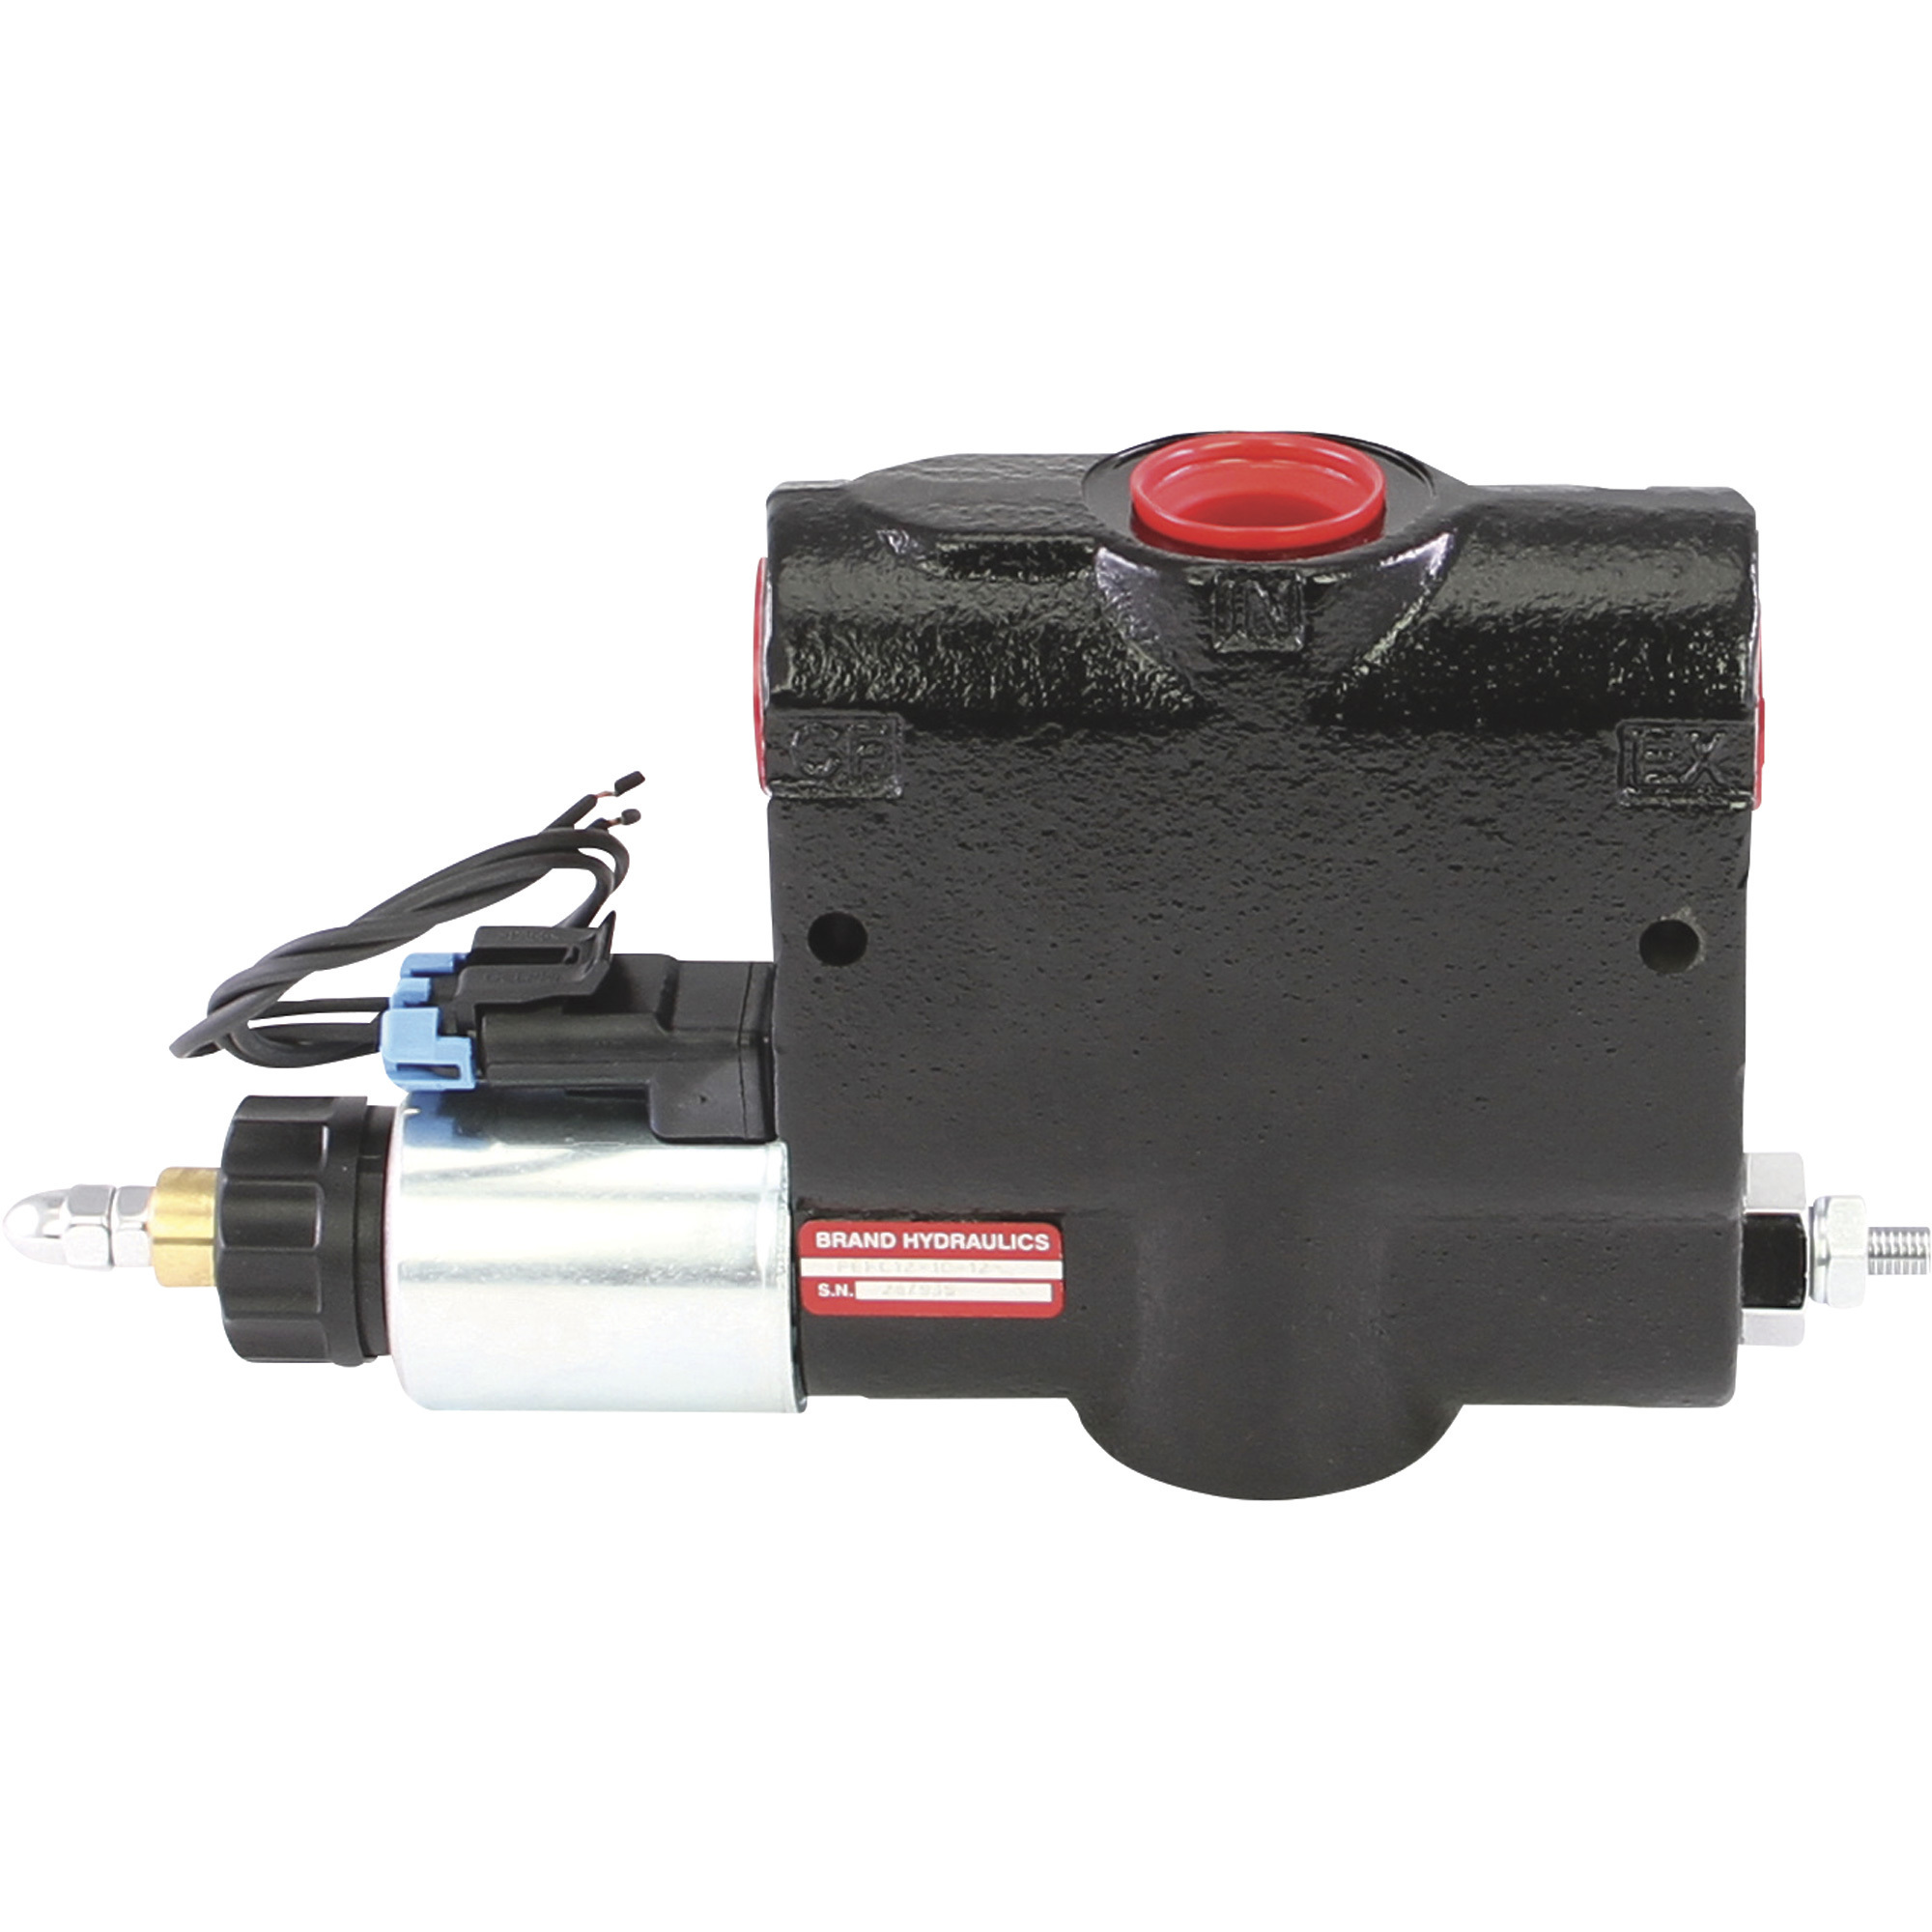 Brand Hydraulics Electronically Adjustable Flow Control Valve â 0â10 GPM, 3,000 PSI, Model PEFC12-10-12